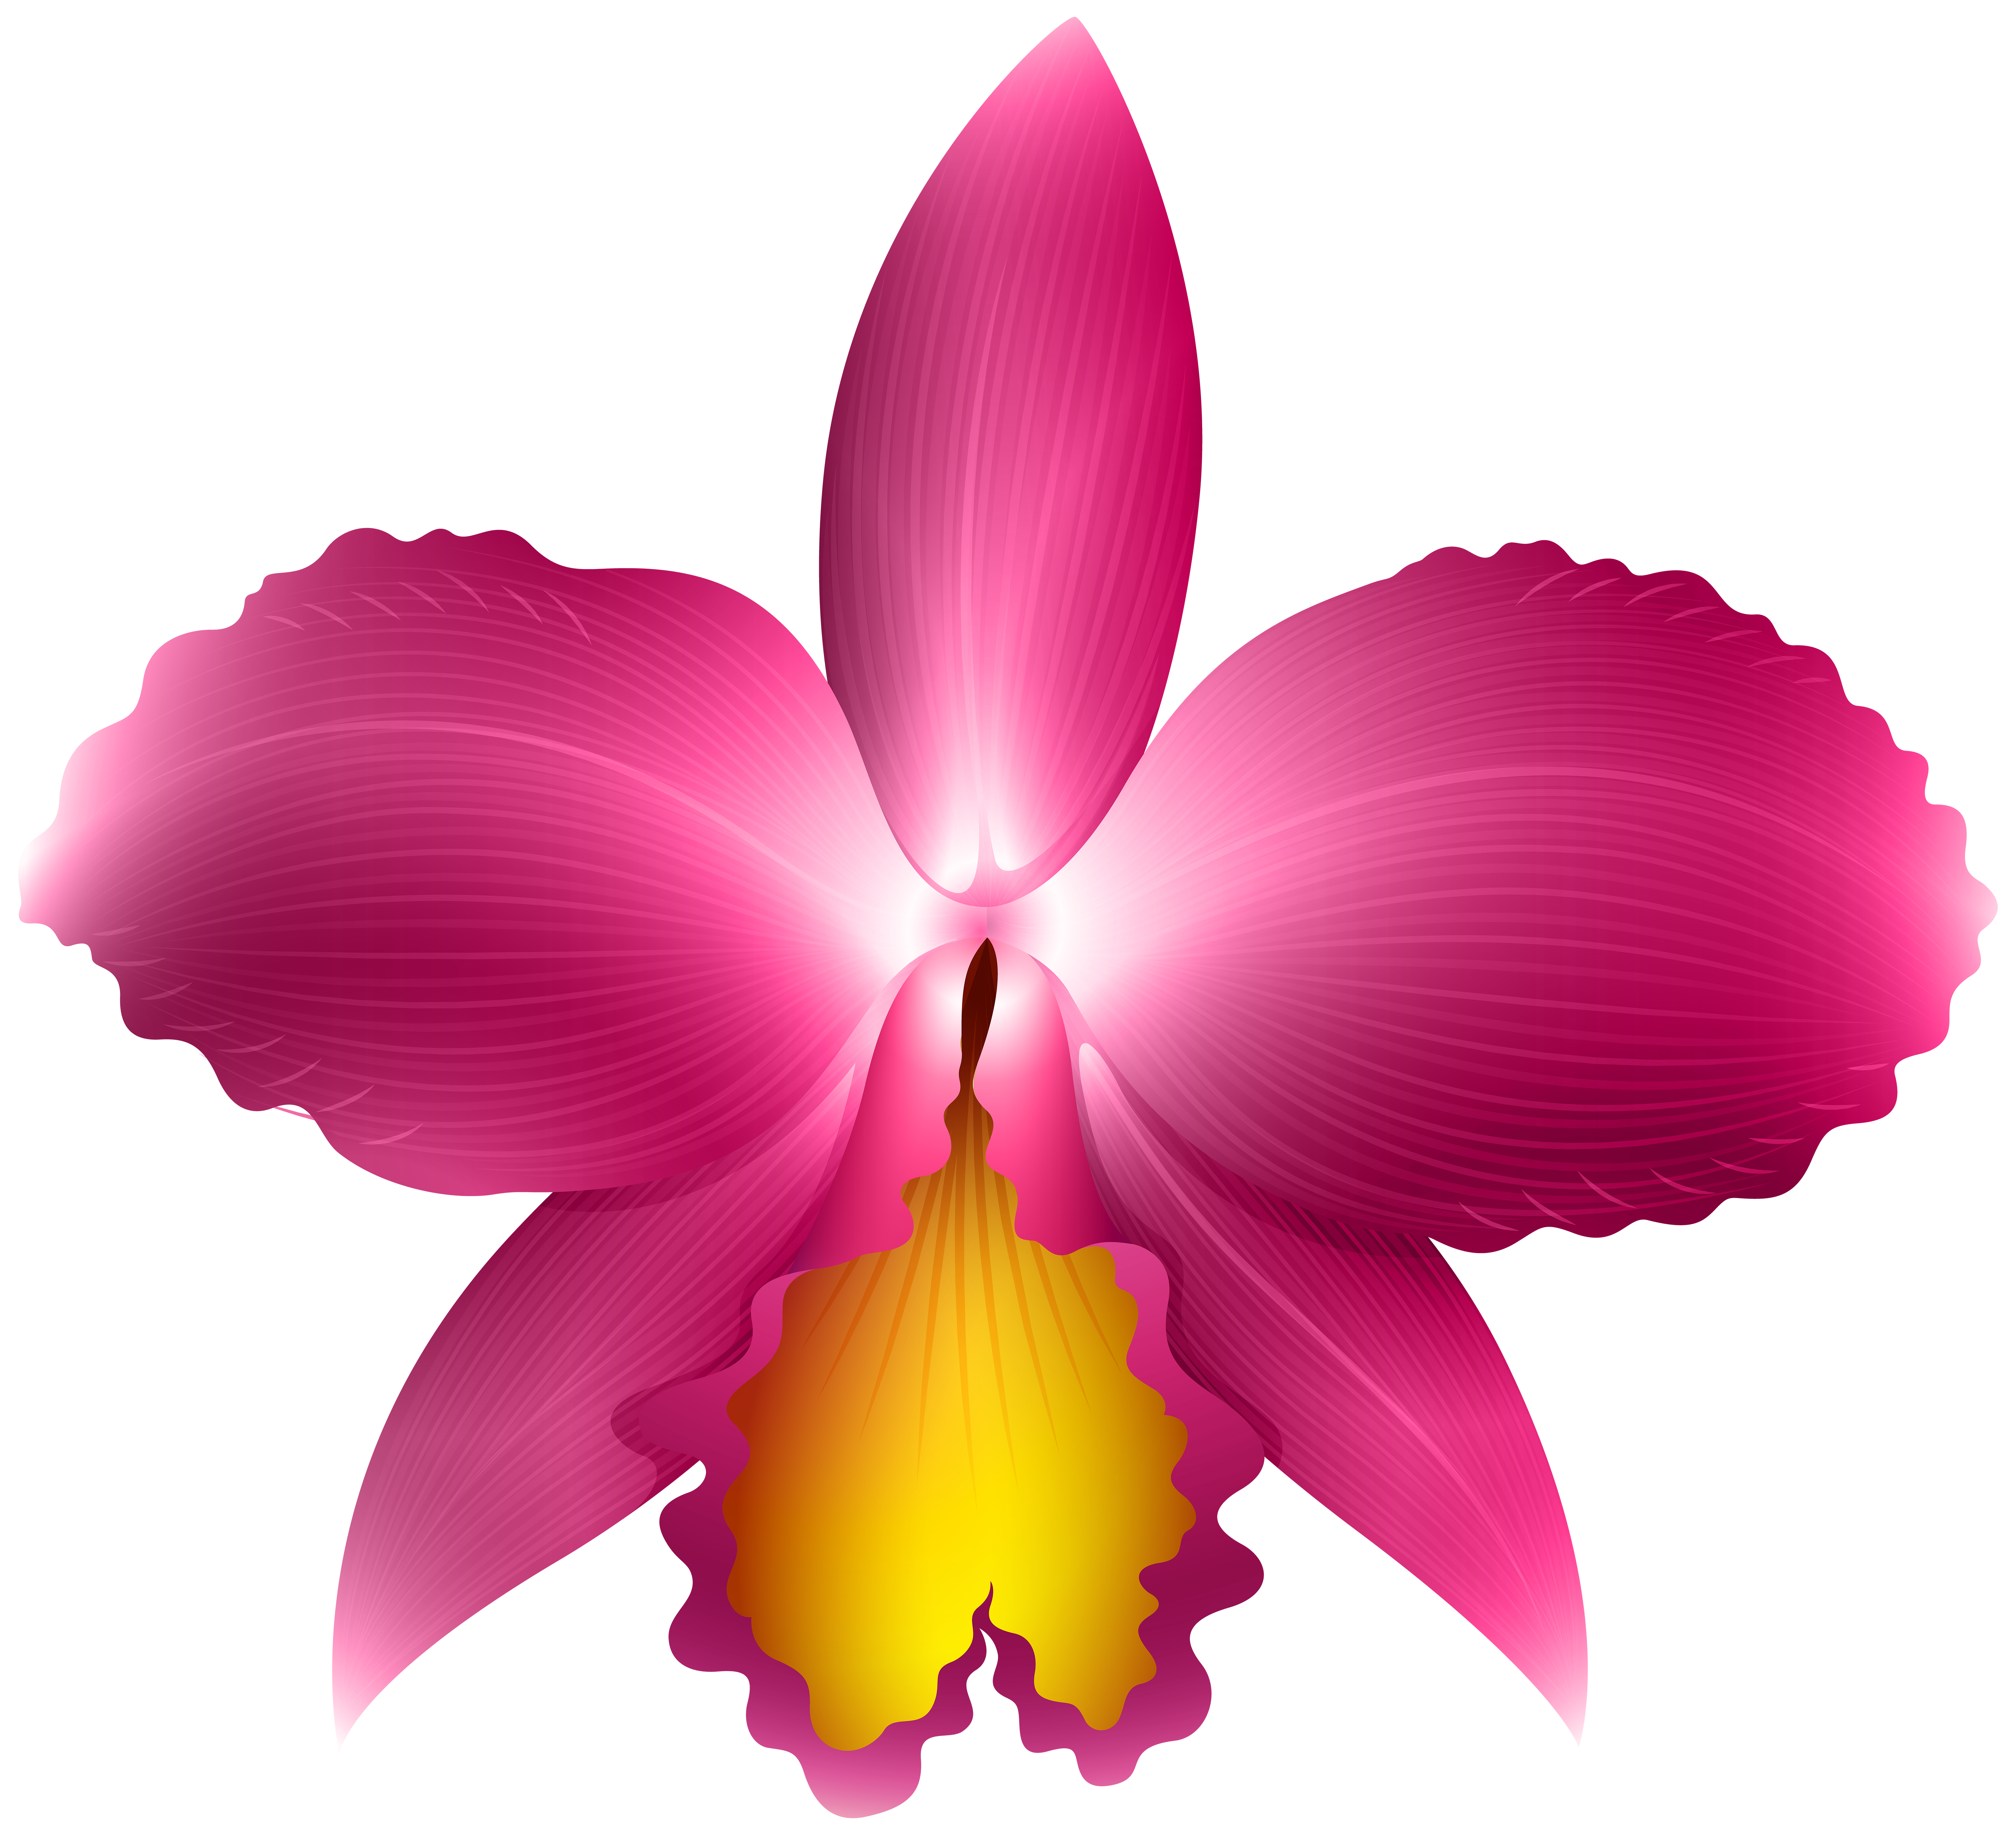 orchid clipart orchid flower